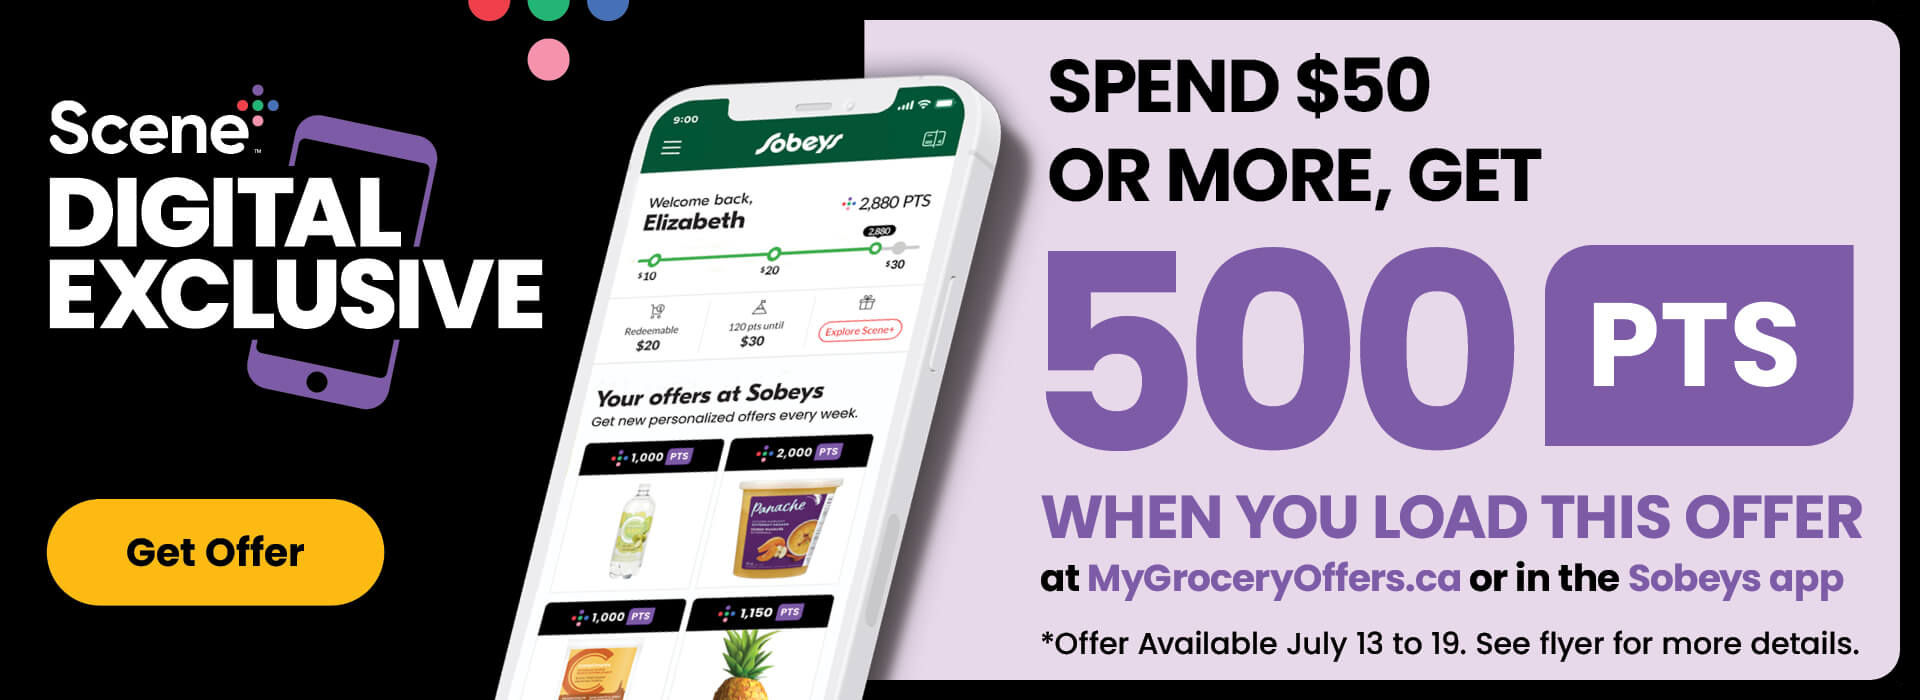 Scene+ Digital Exclusive Offer. Spend $50 or more, get 500 PTS when you load this offer at mygroceryoffers.ca or in the Sobeys App. Offer available to be loaded from July 13 to July 19. See flyer for more details.